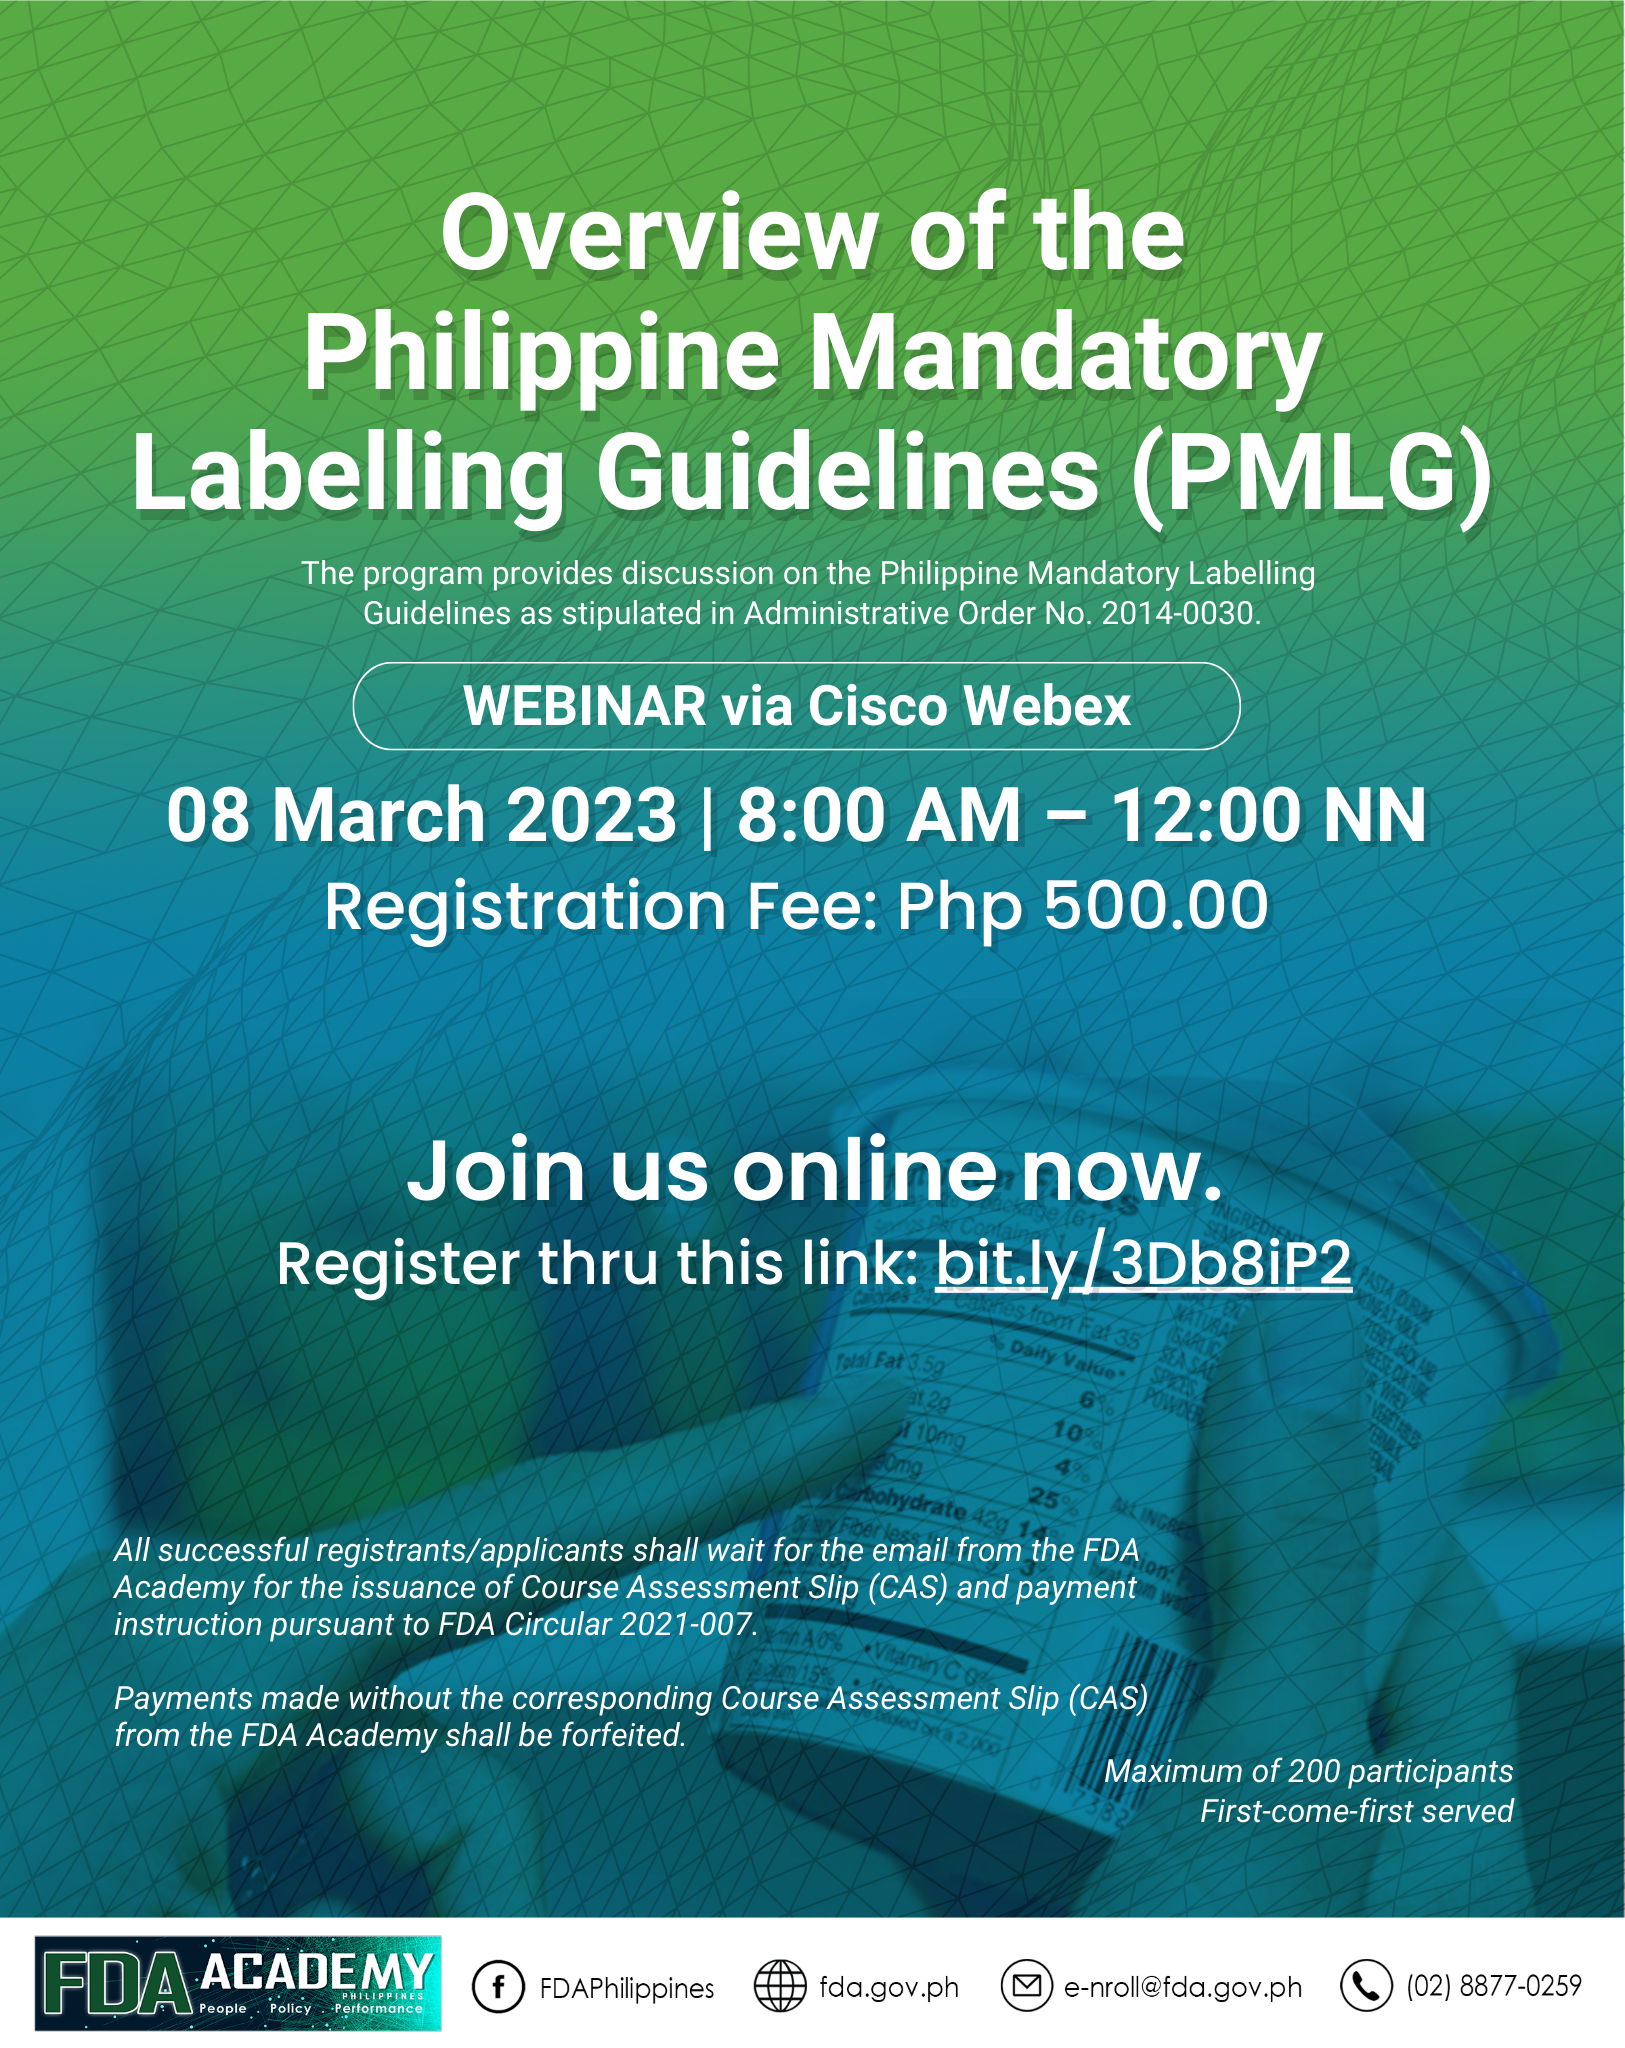 Overview of the Philippines Mandatory Labelling Guidelines (PMLG)